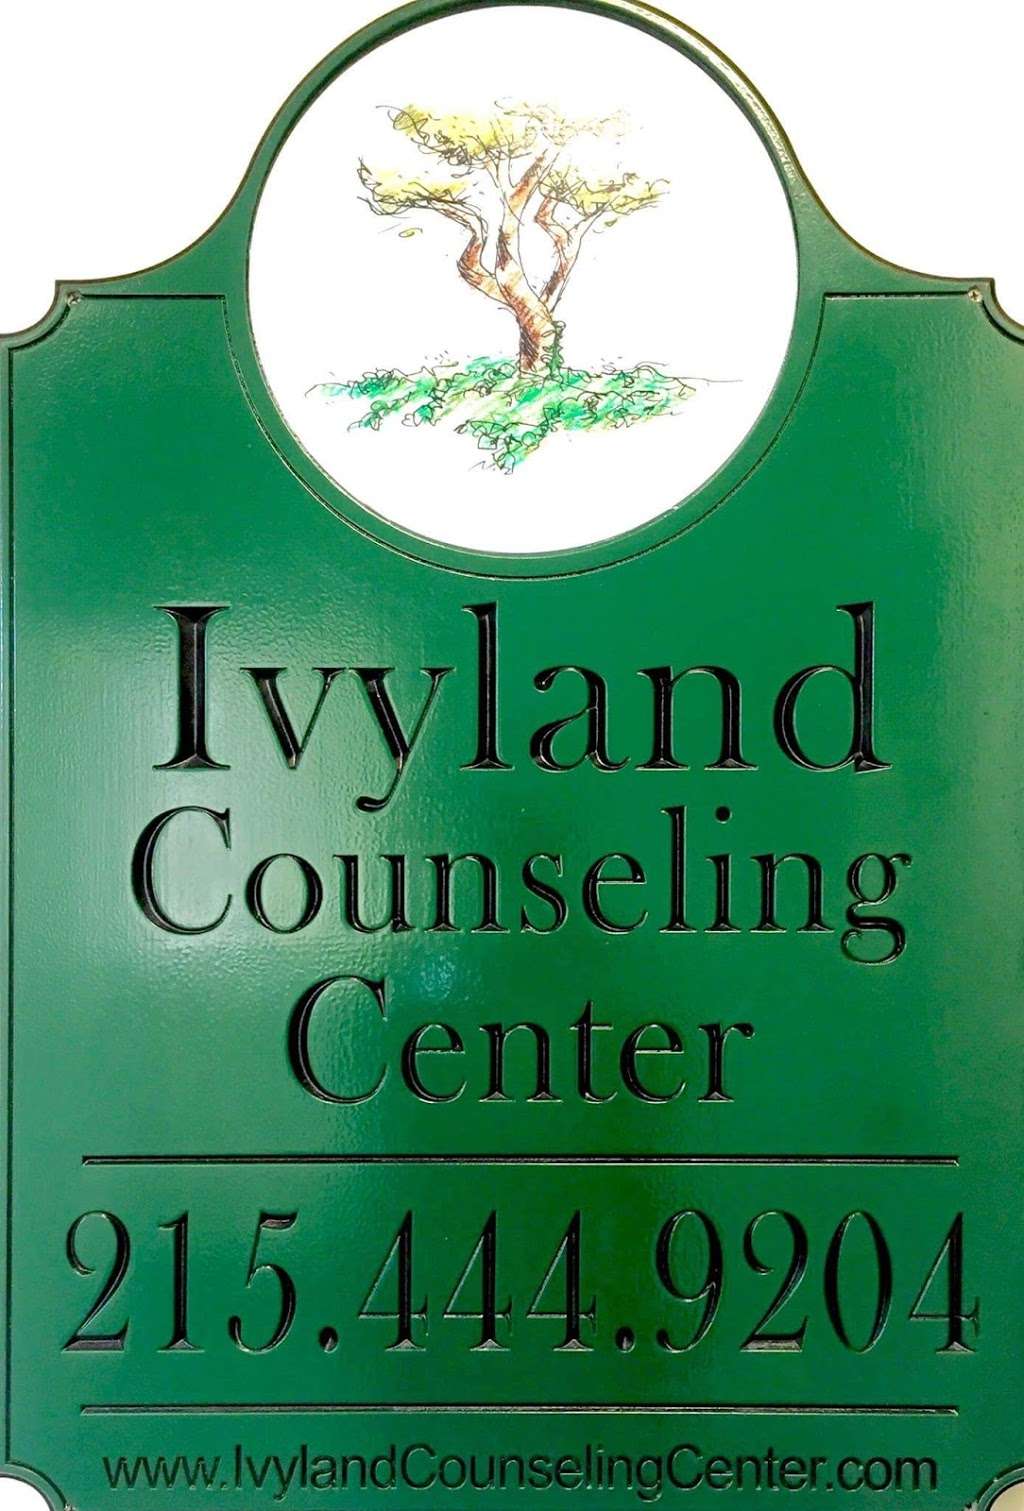 Ivyland Counseling Center | 1210 Old York Rd #202, Warminster, PA 18974 | Phone: (215) 444-9204